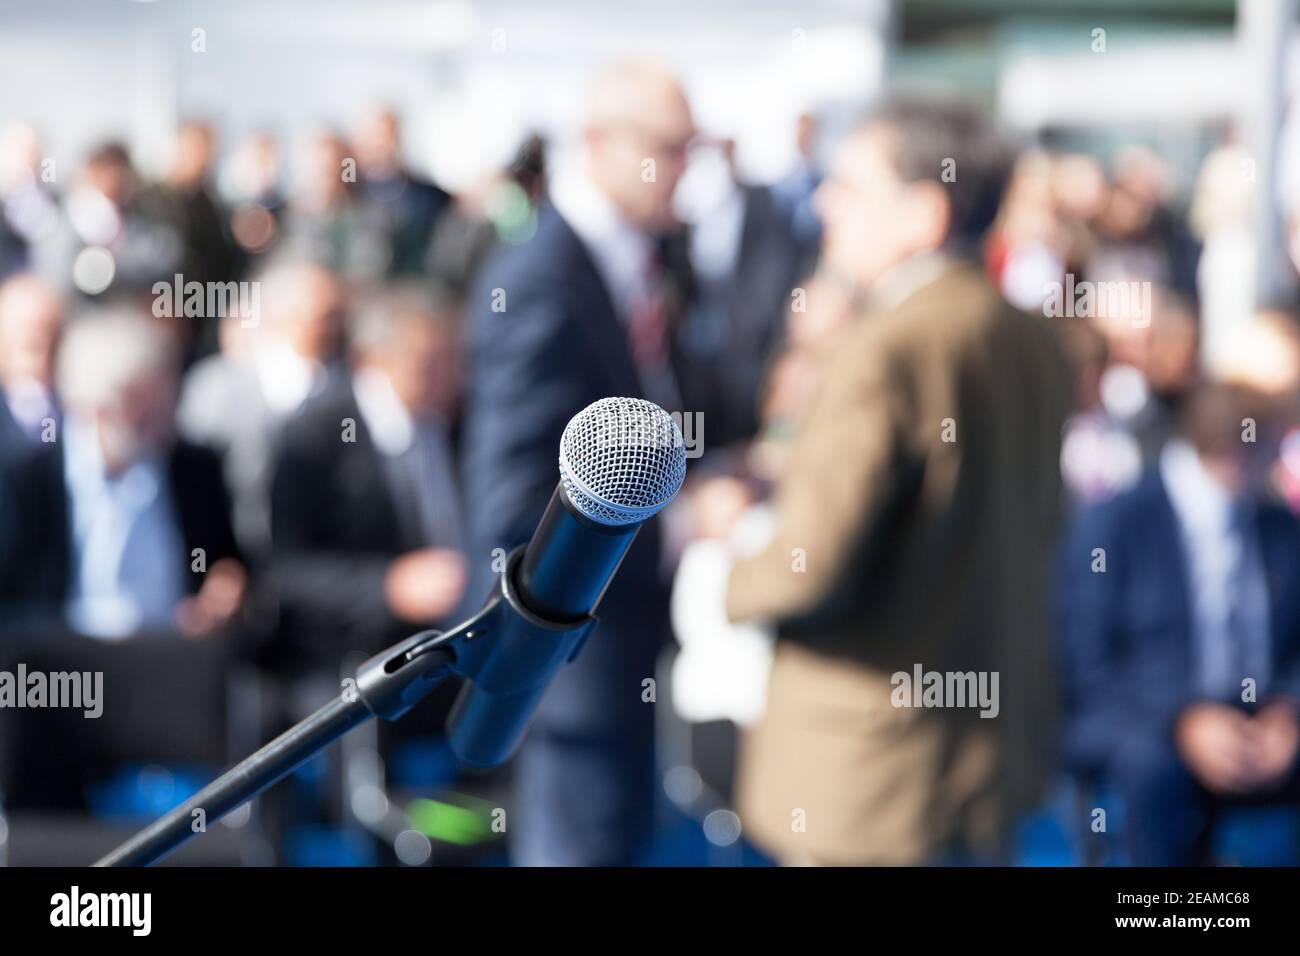 Business conference or corporate presentation. Microphone in focus against blurred audience. Stock Photo